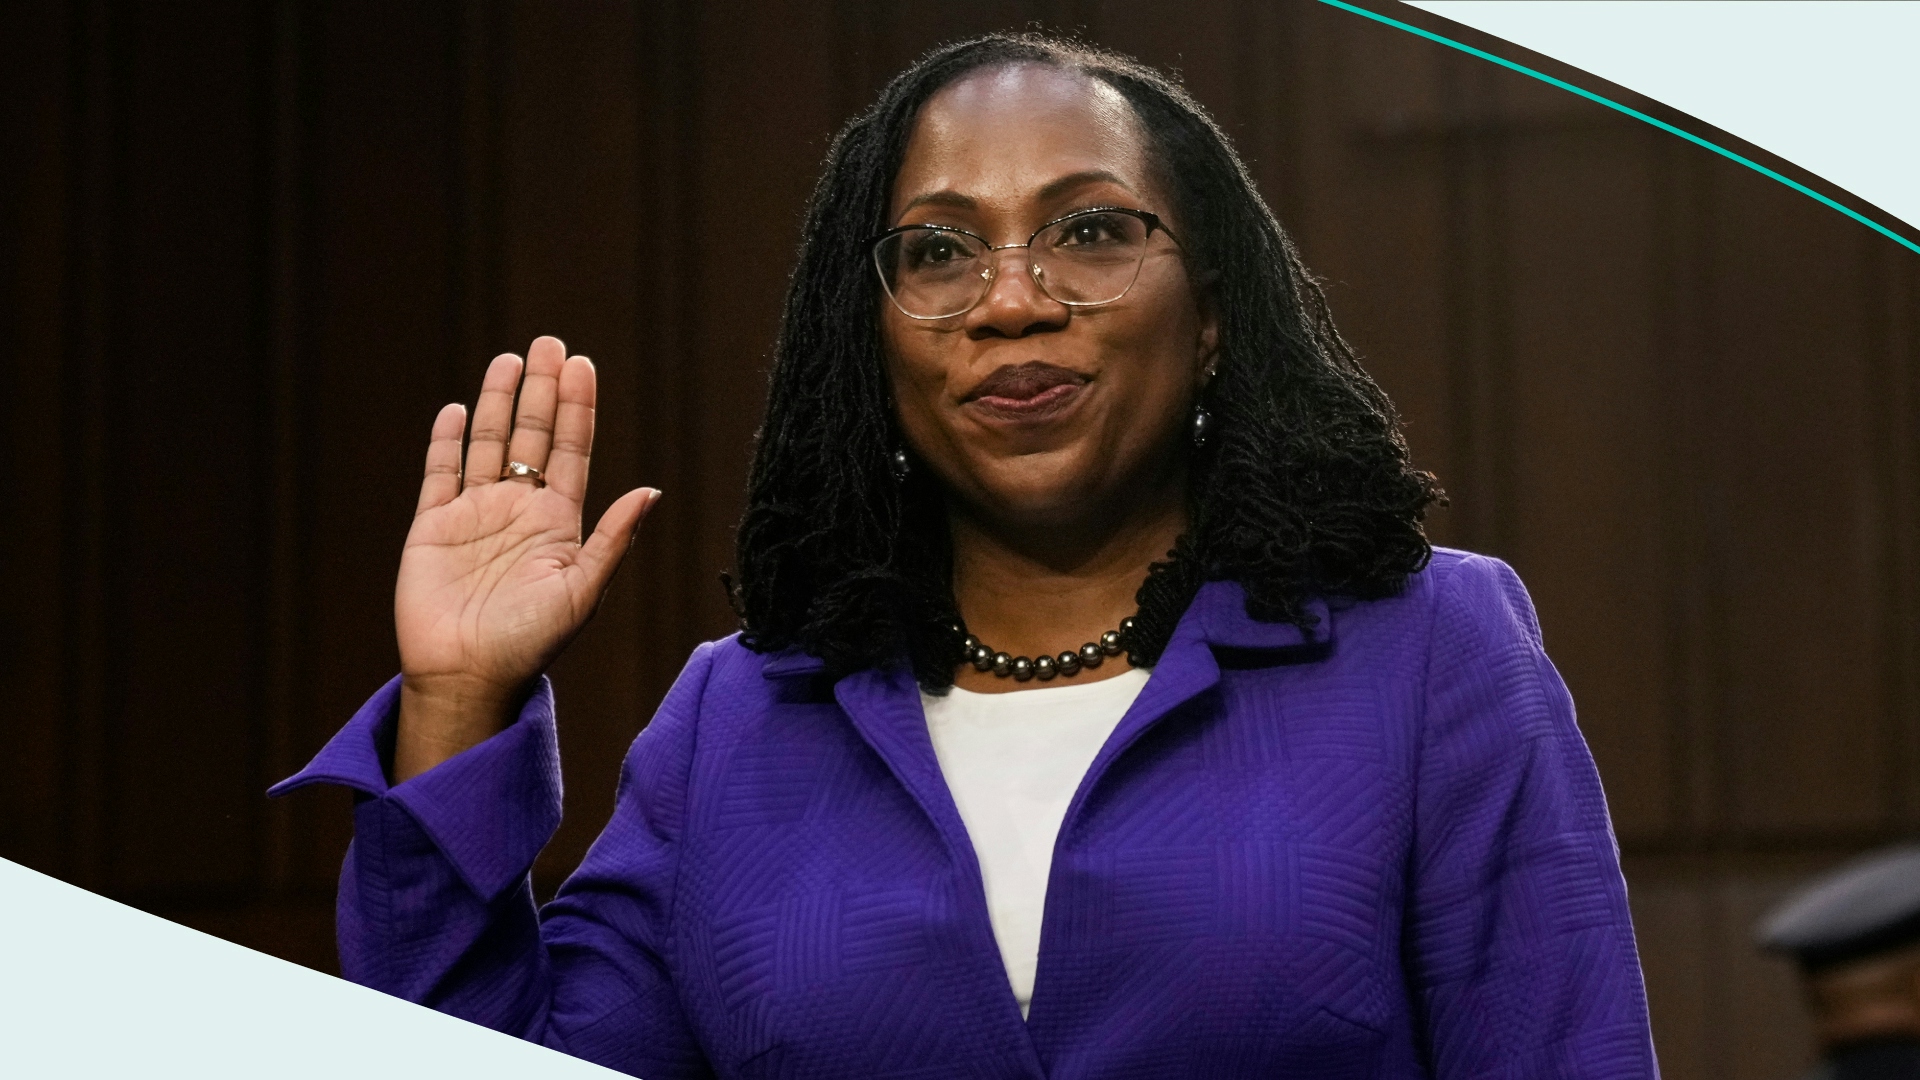 U.S. Supreme Court nominee Judge Ketanji Brown Jackson is sworn-in during her confirmation hearing before the Senate Judiciary Committee in the Hart Senate Office Building on Capitol Hill March 21, 2022 in Washington, DC. 